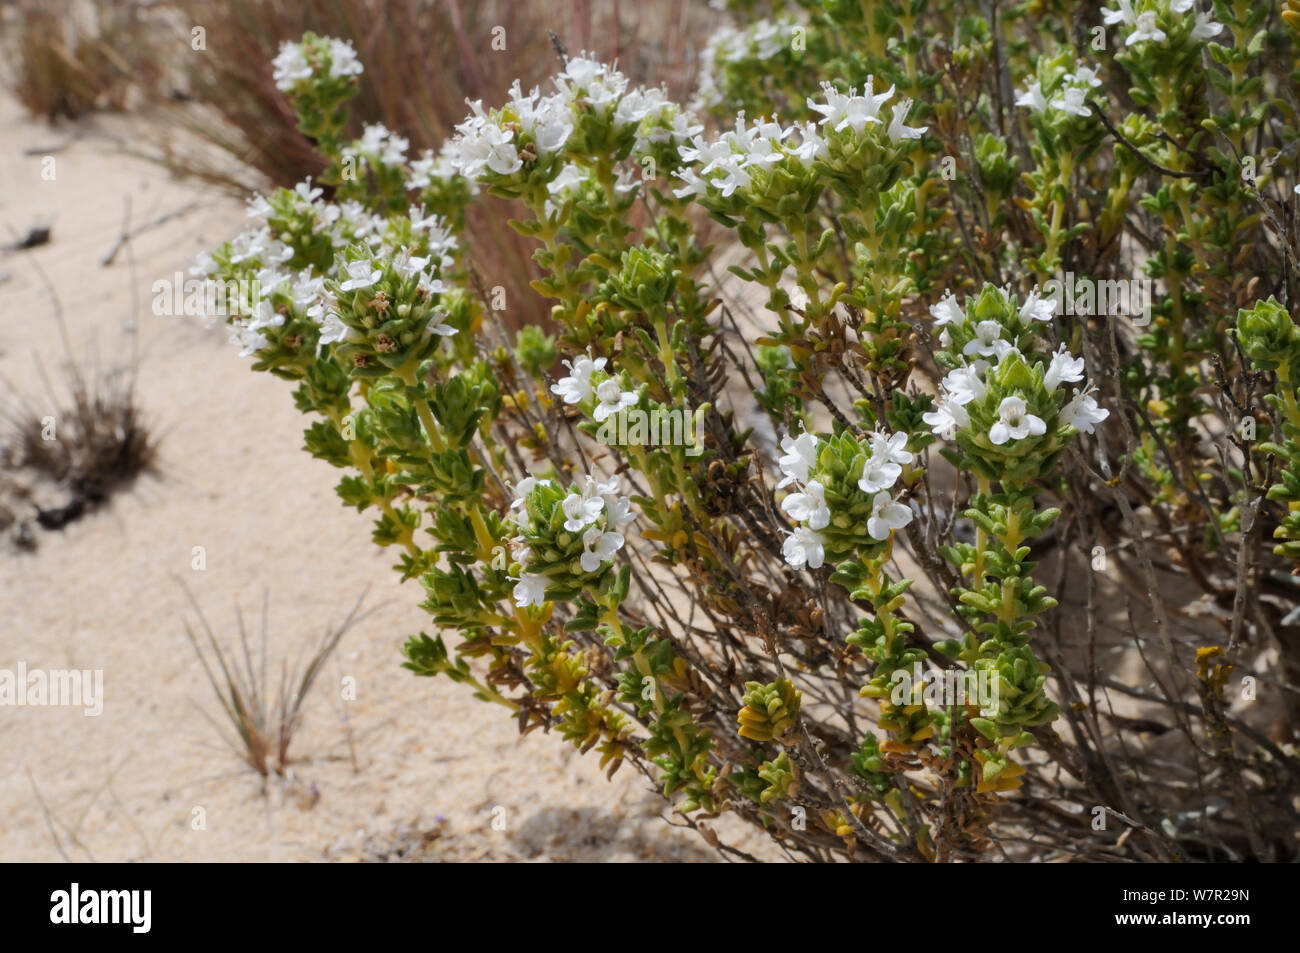 Portuguese Thyme (Thymus carnosus) a species endemic to southern Portugal, flowering in sand dunes. Culatra island, Parque Natural da Ria Formosa, Olhao, Algarve, Portugal, June. Stock Photo